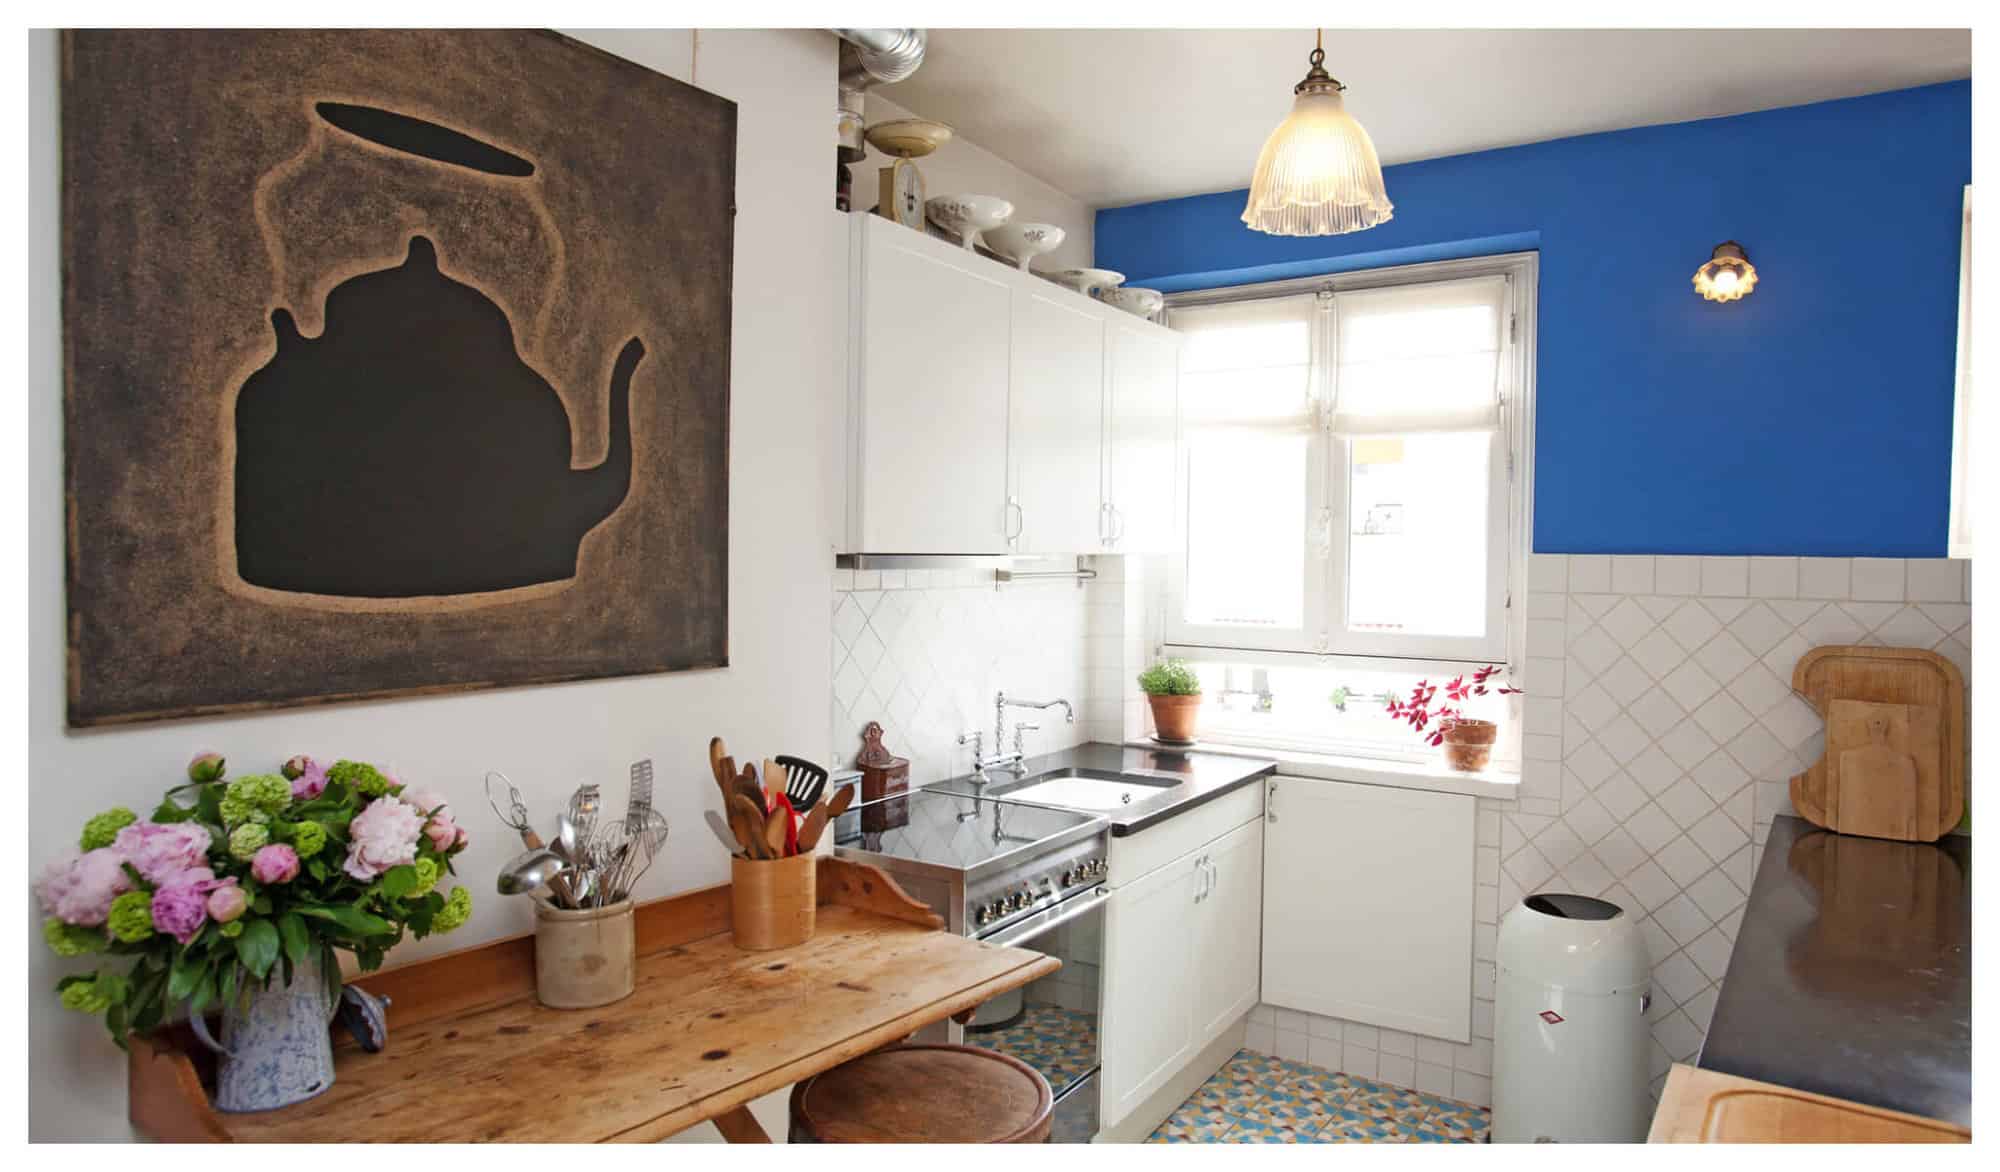 The kitchen of Erica Berman's Parisian apartment, with white cabinets, blue walls, wooden table, and a black kettle artwork.